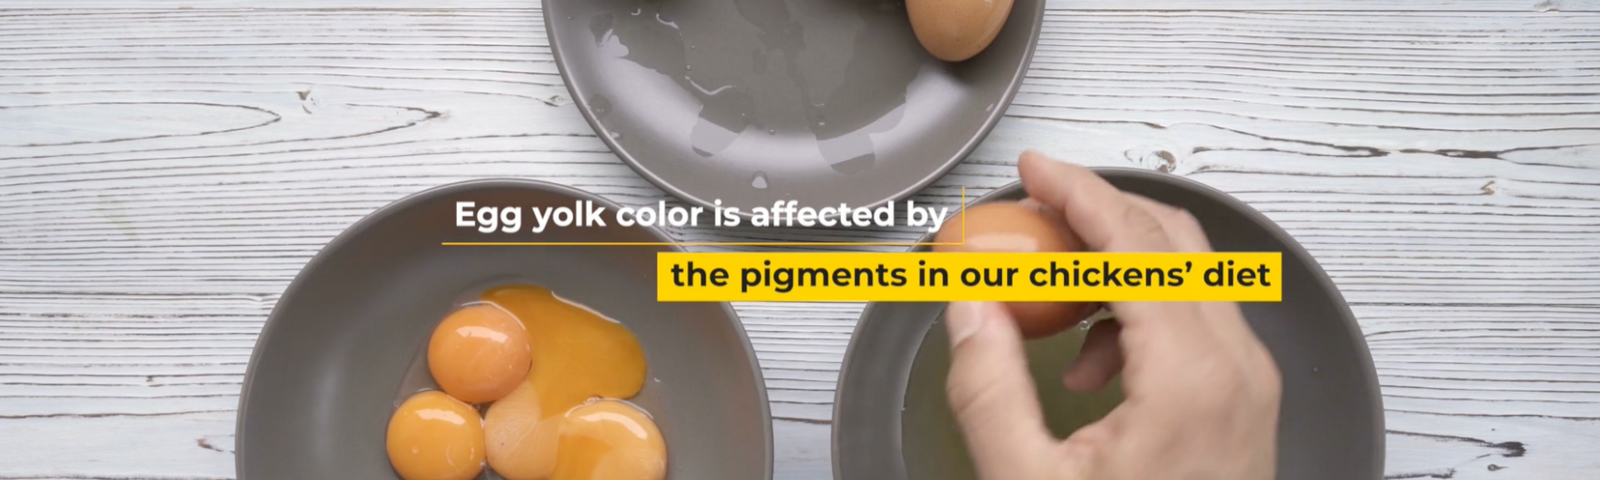 What Can I Do to Get Brighter Yolks?